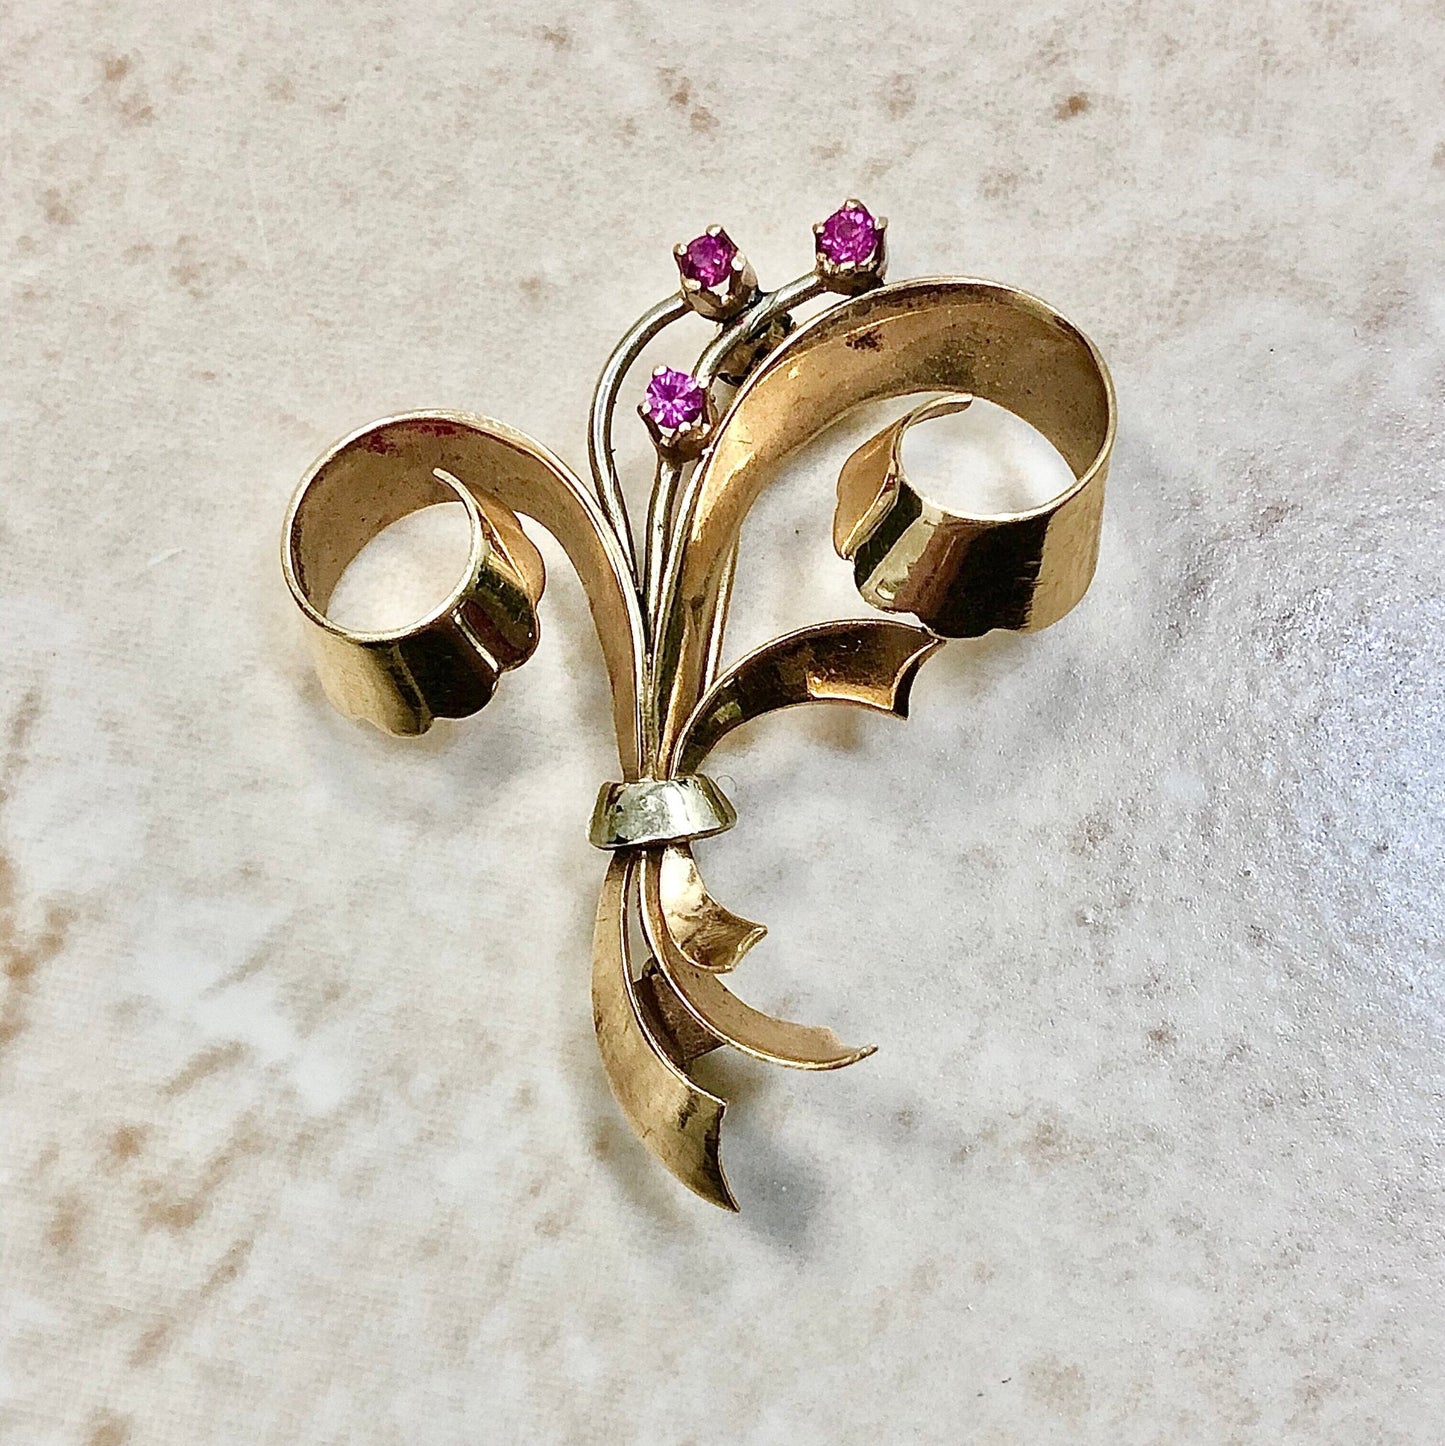 Vintage 18K Italian Retro Synthetic Ruby Brooch - Two Tone Gold Brooch - Gold Ruby Pin - July Birthstone - Christmas Gift For Her